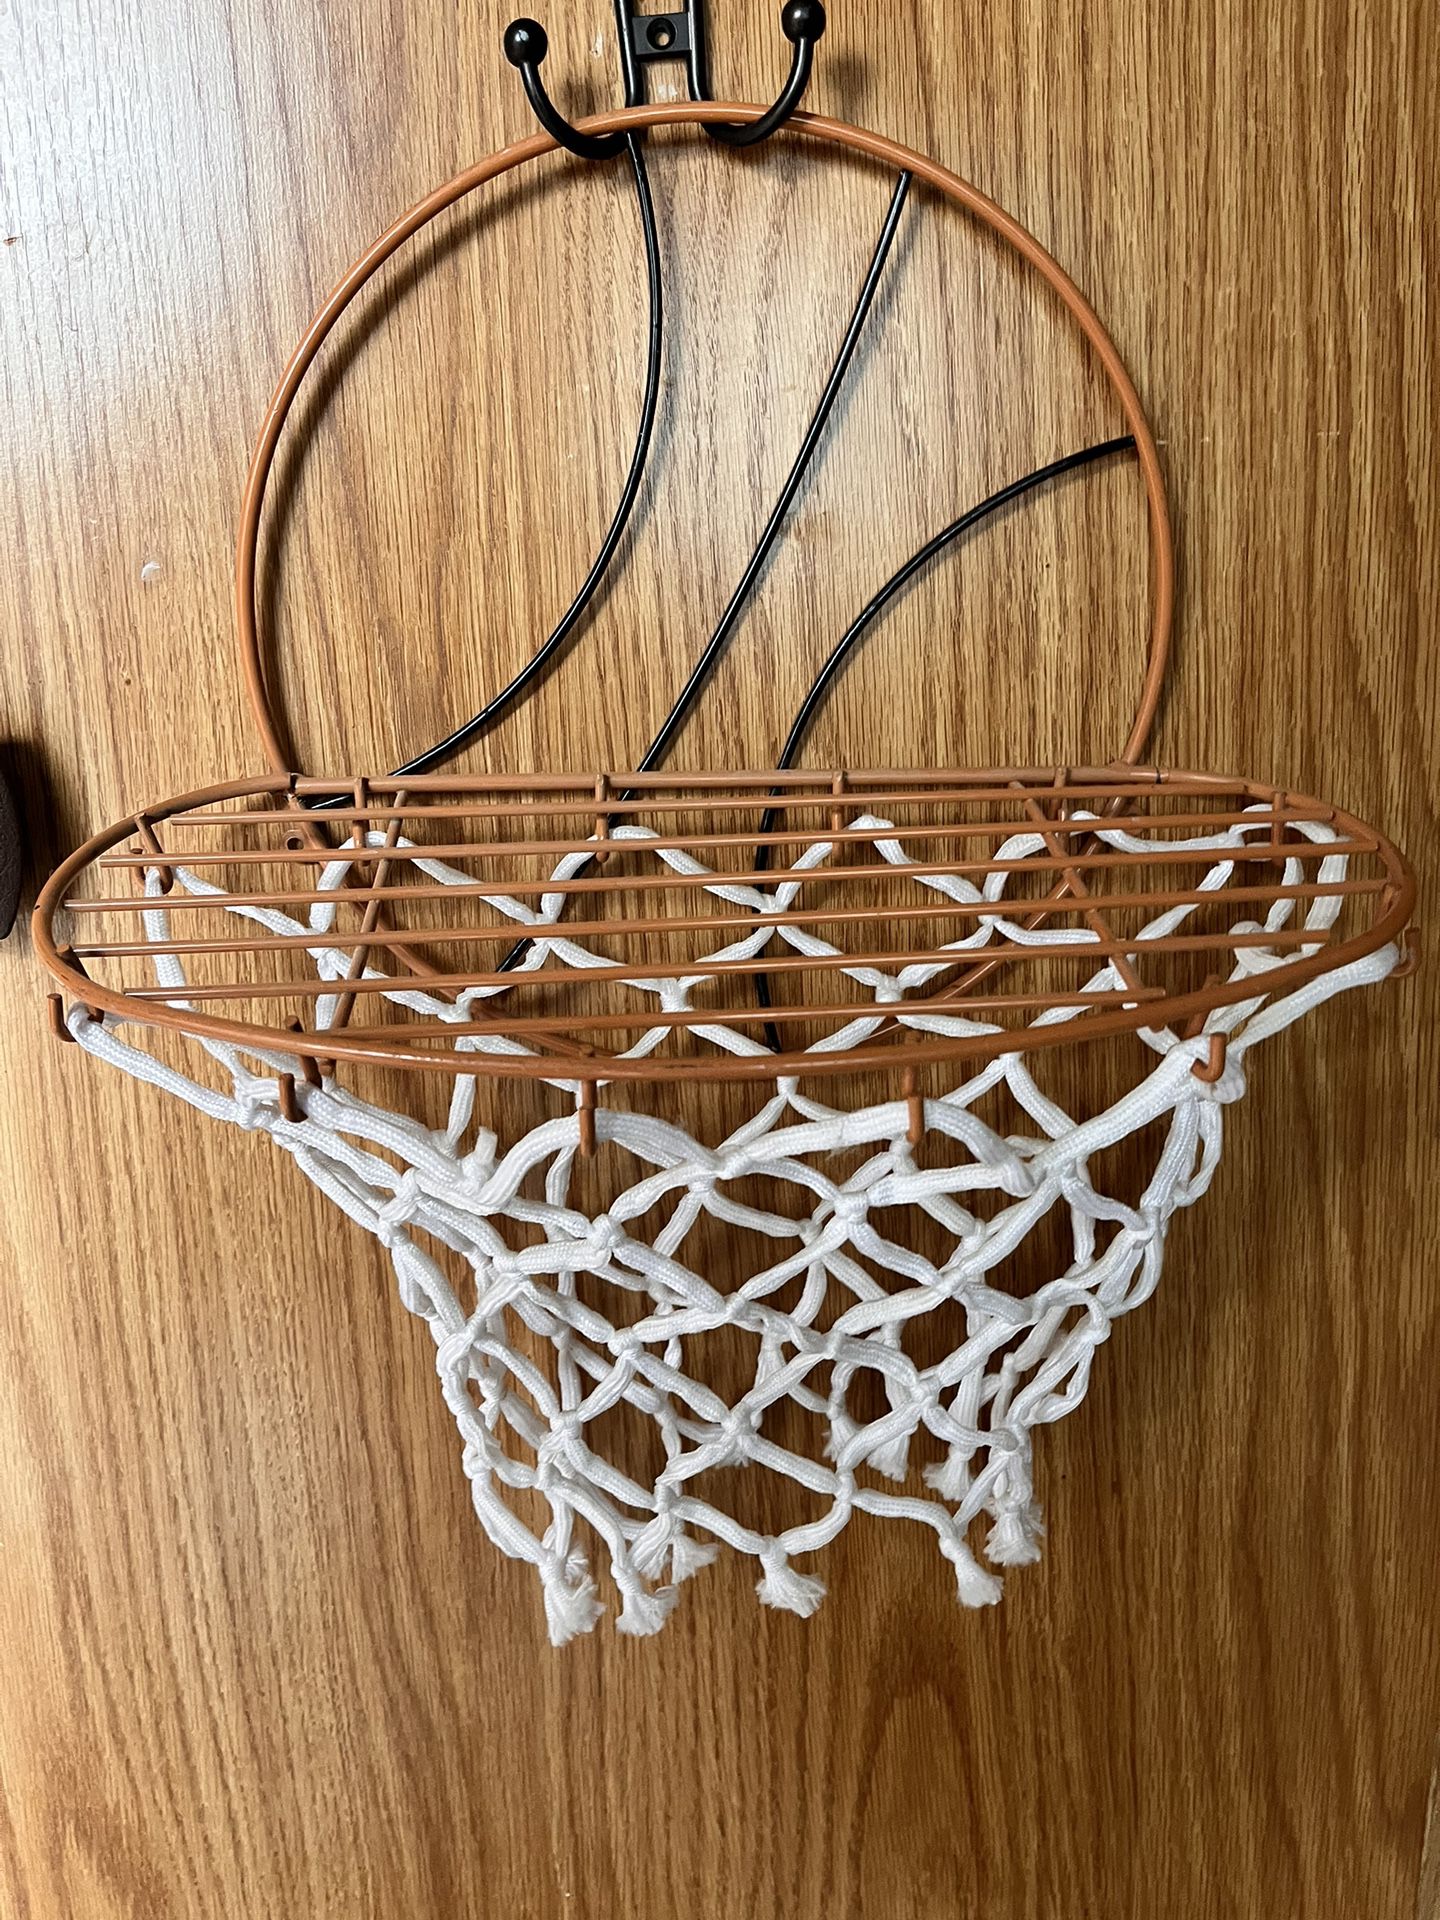 Basketball Hoop For Garbage Can